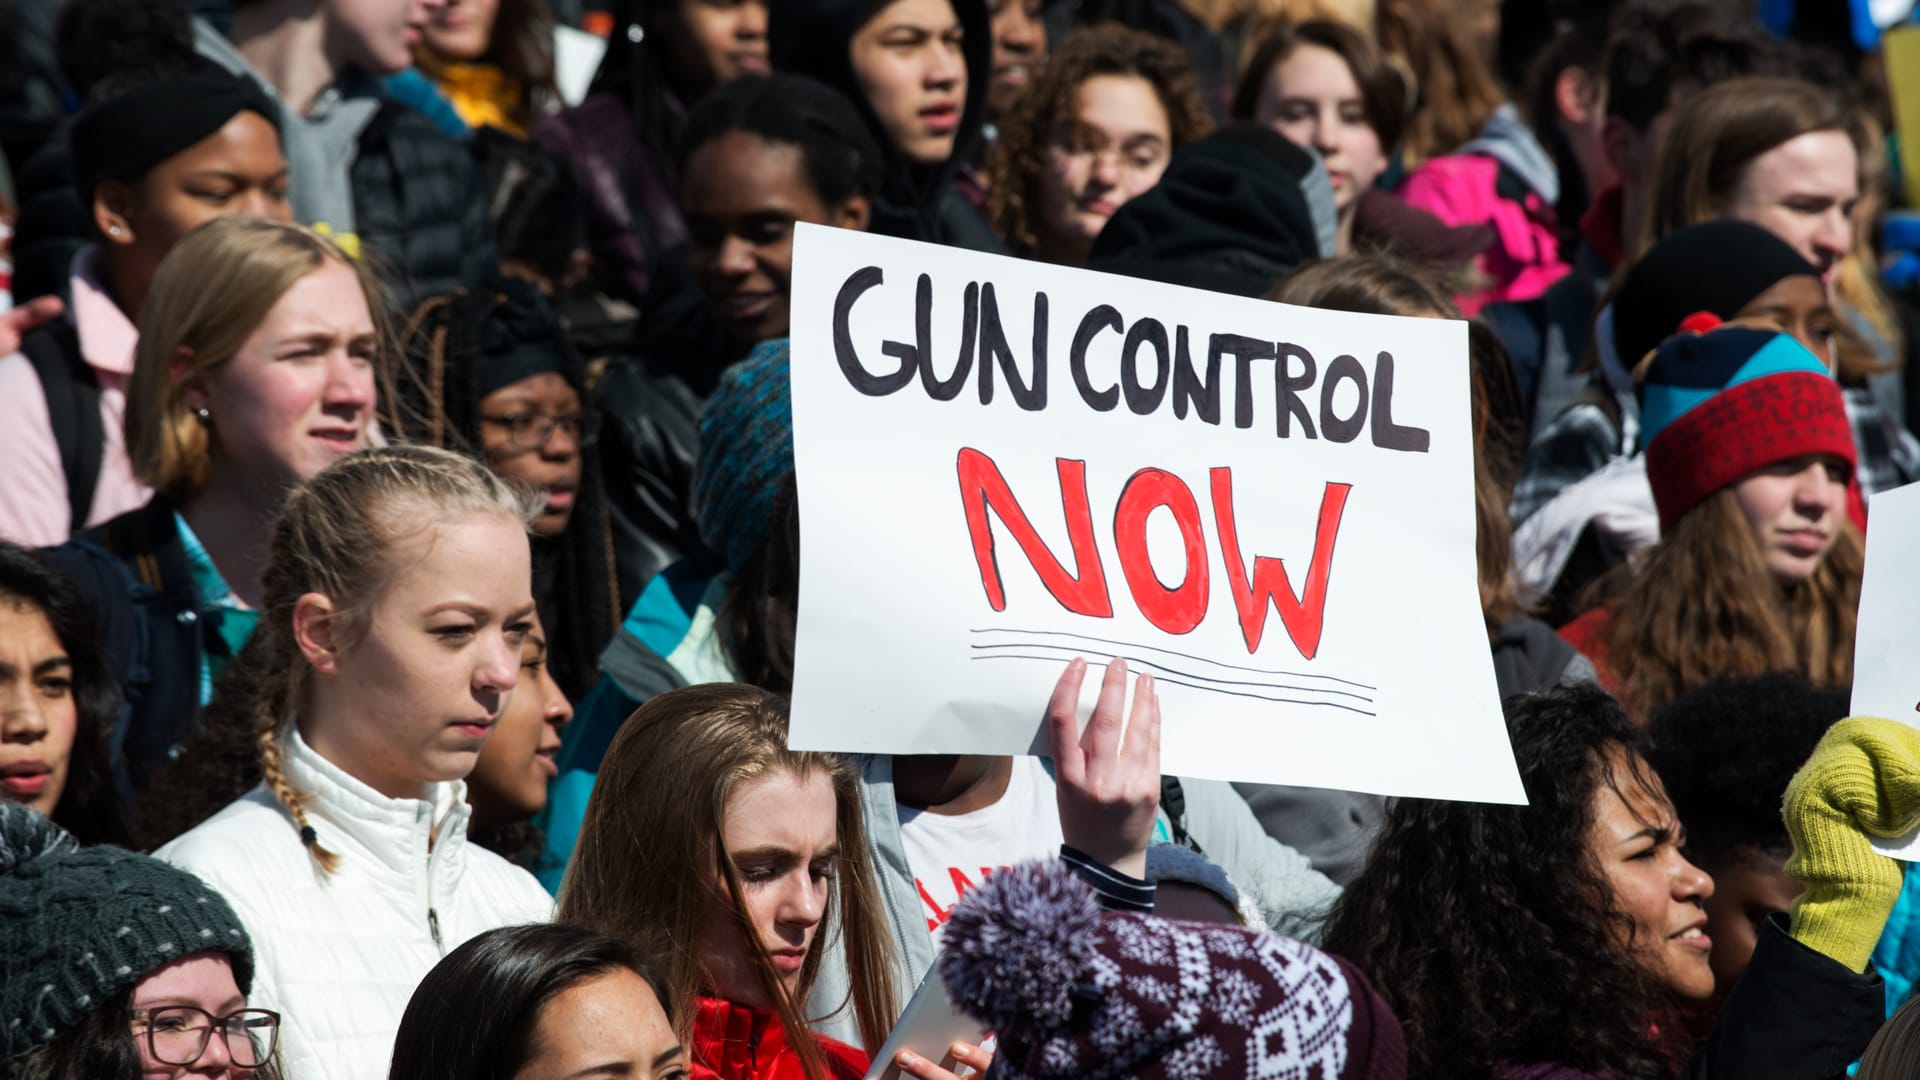 Here’s a list of gun control laws passed since the Parkland shooting